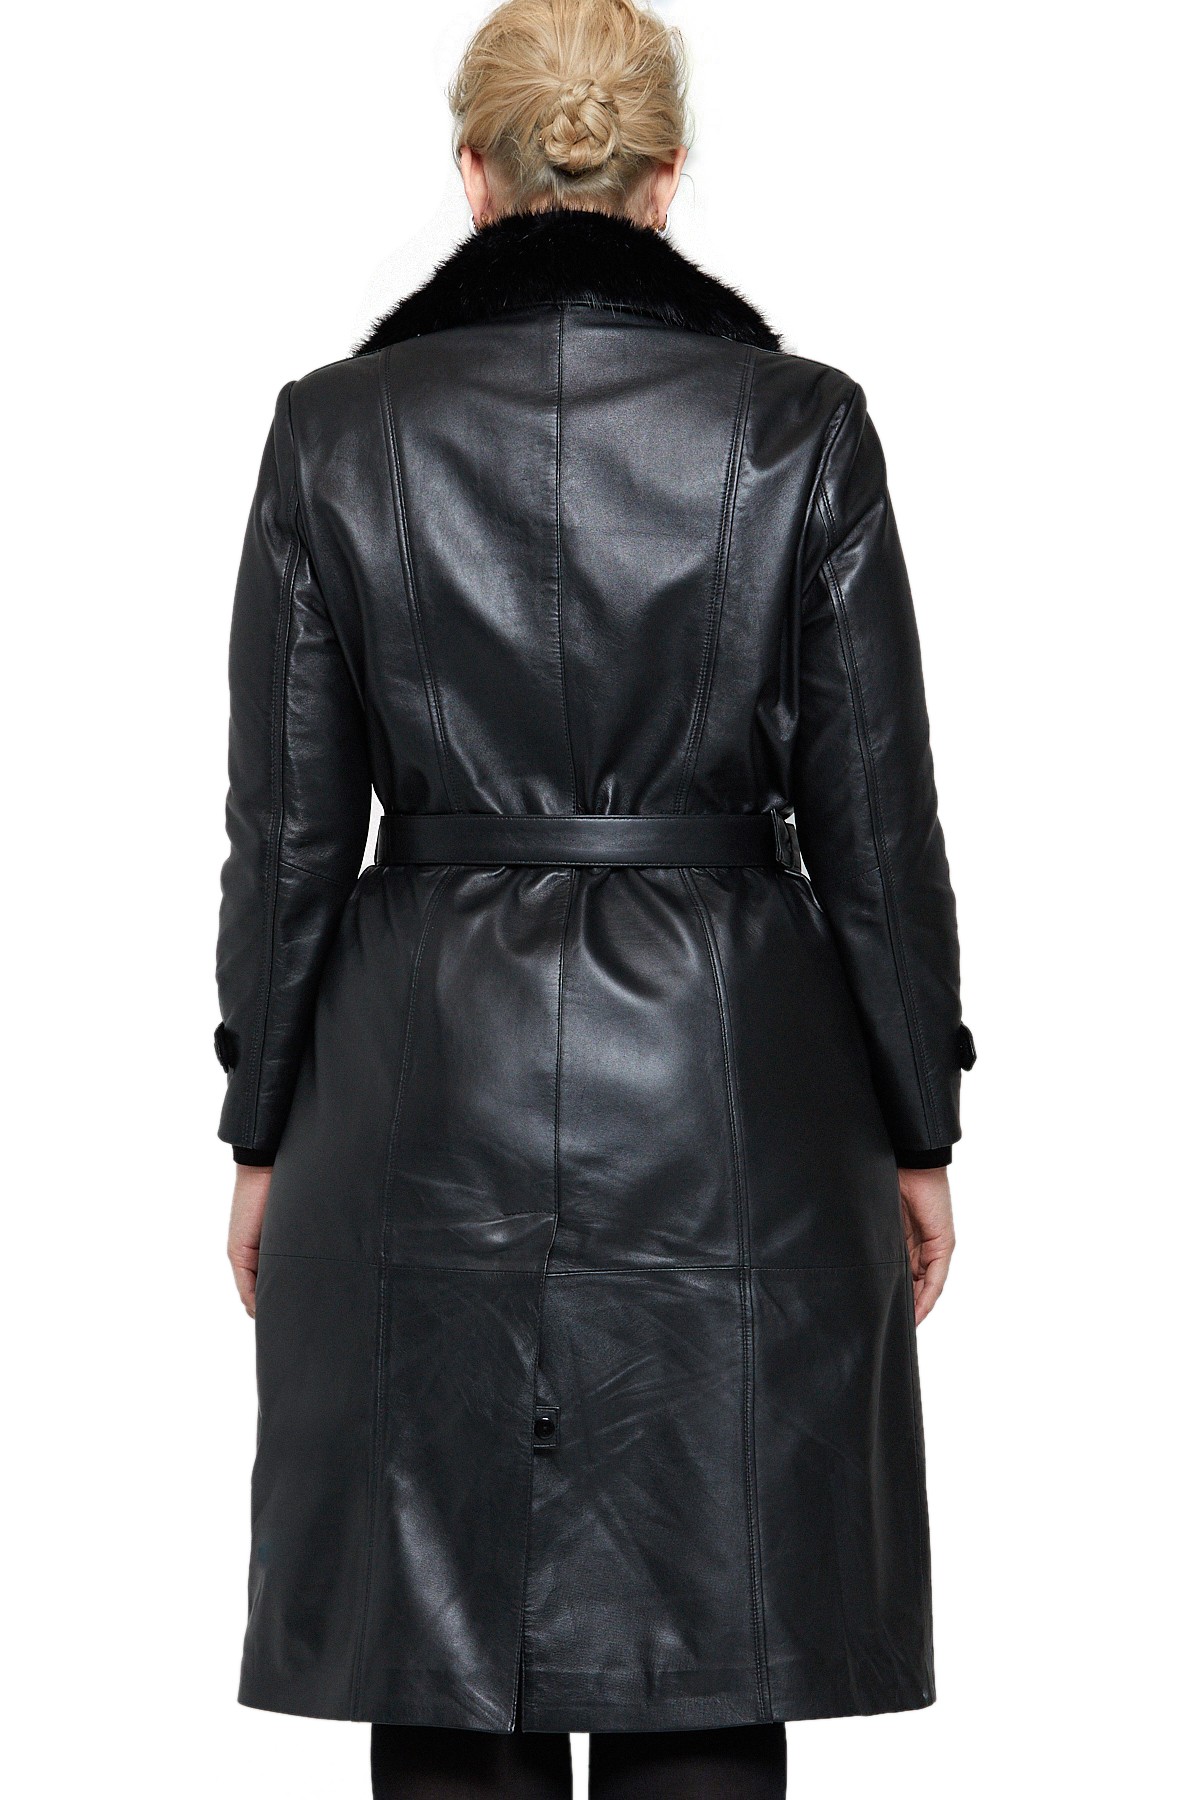 UNICORN Womens Classic Full Length Trench Coat Real Leather Jacket #AM 